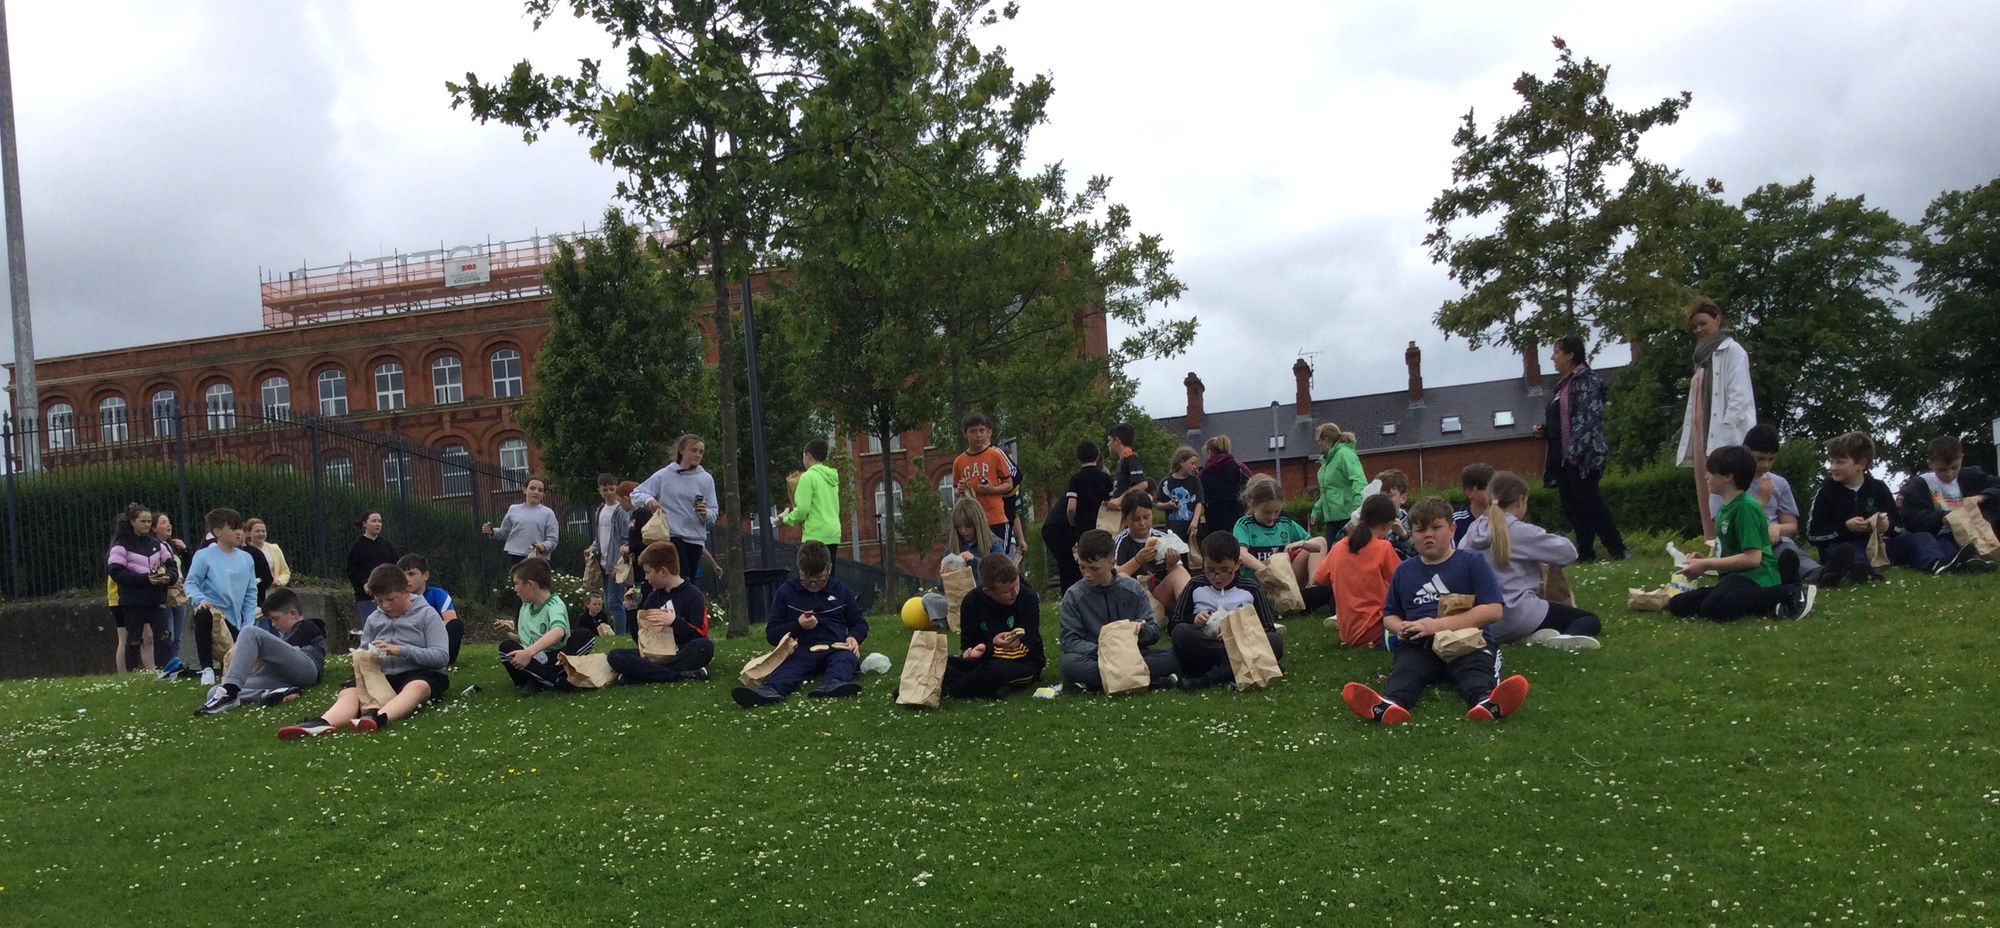 Picnic in the Park - Year 7 June 2021